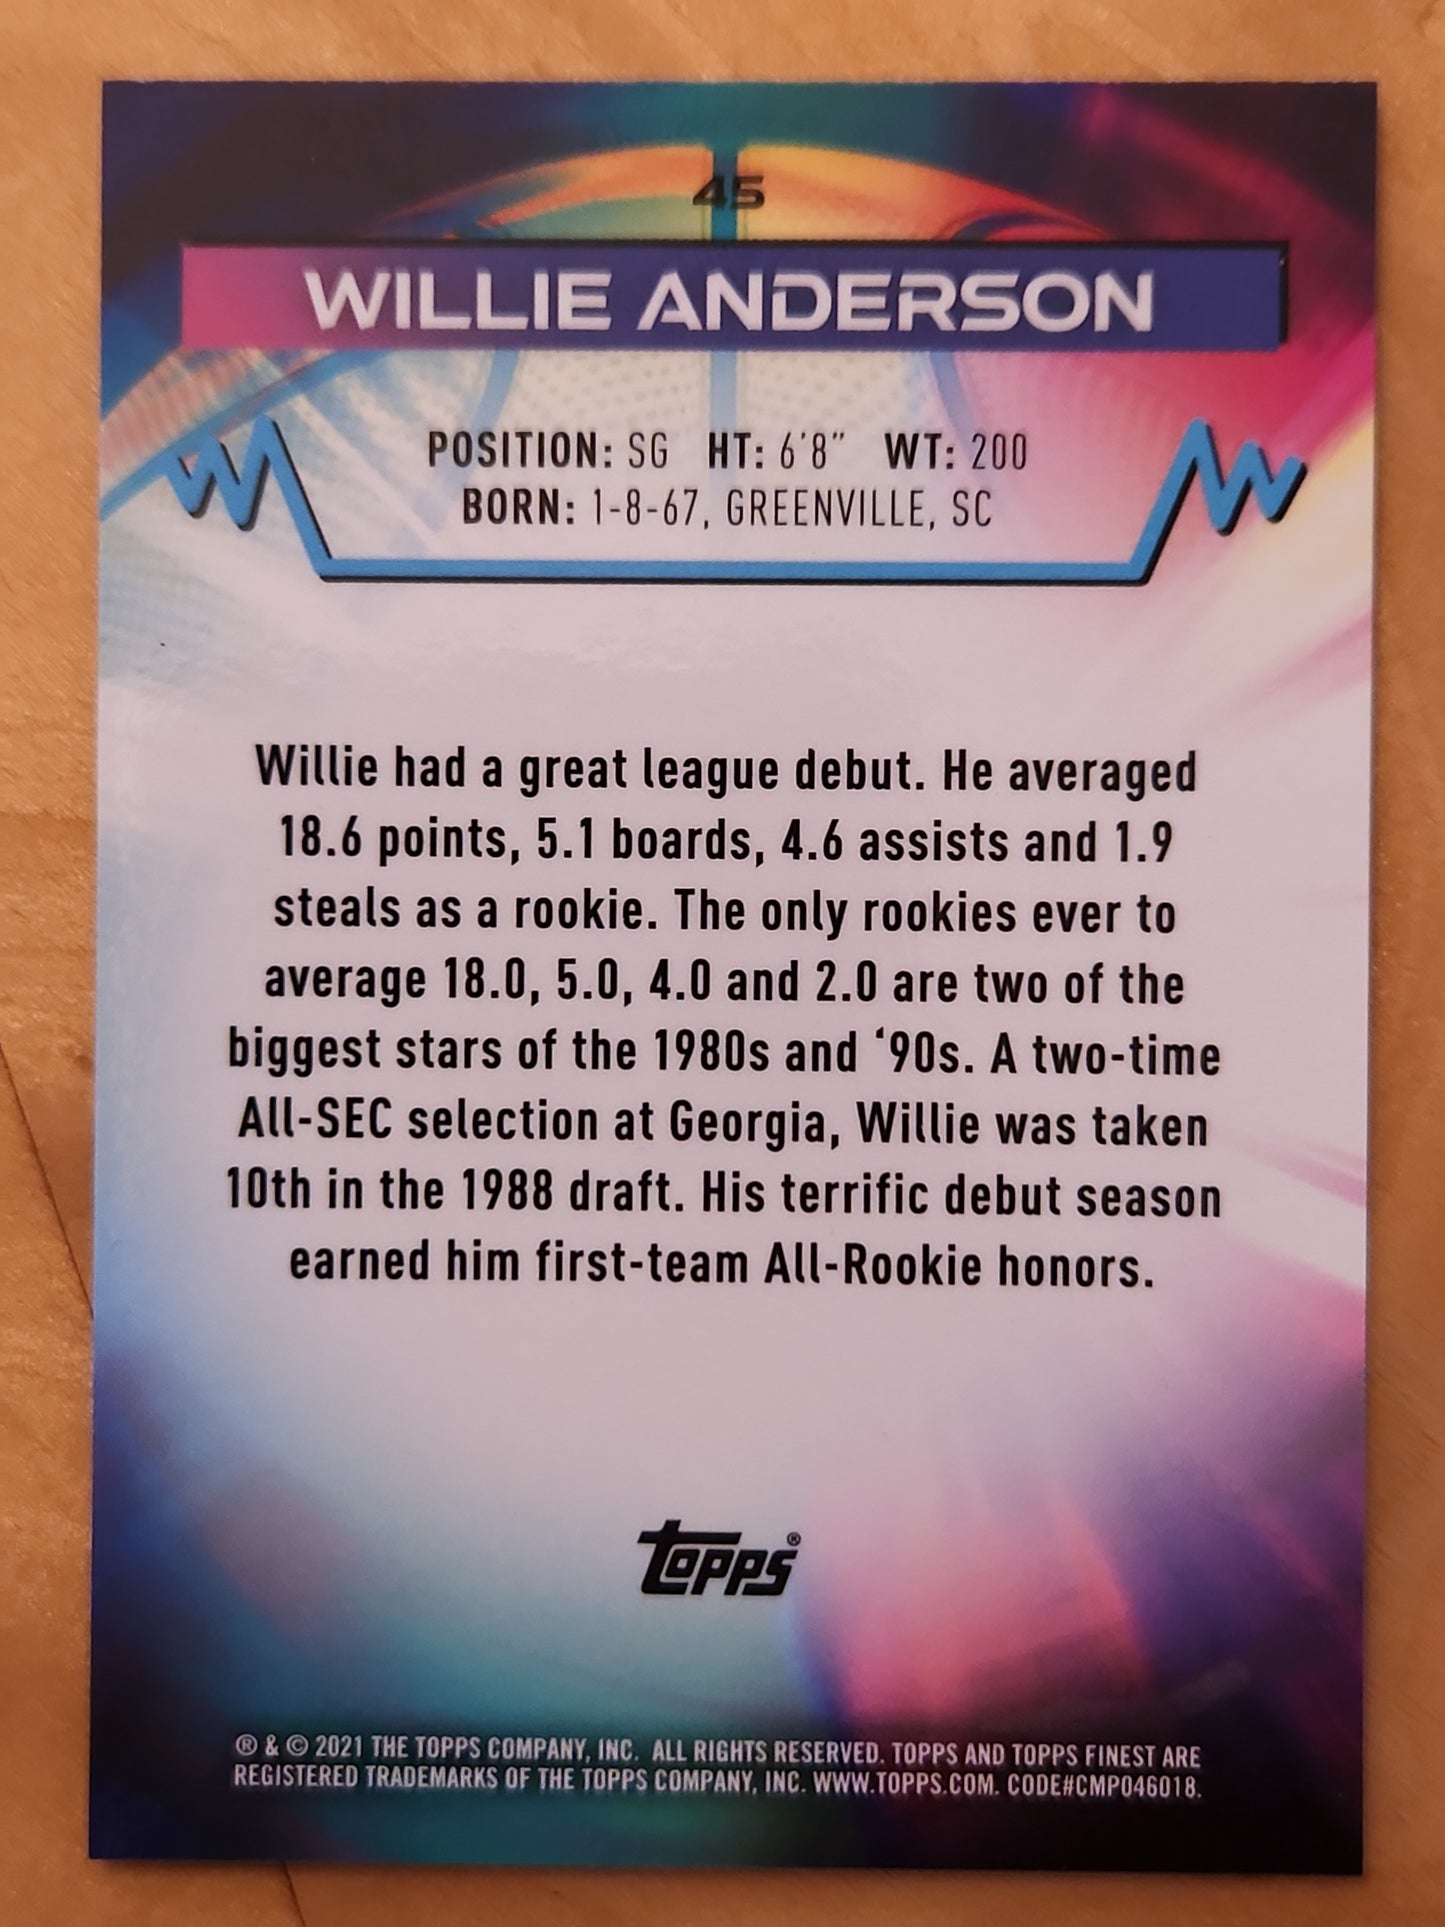 2021 Topps Finest Willie Anderson #45 Green Refractor 27/99